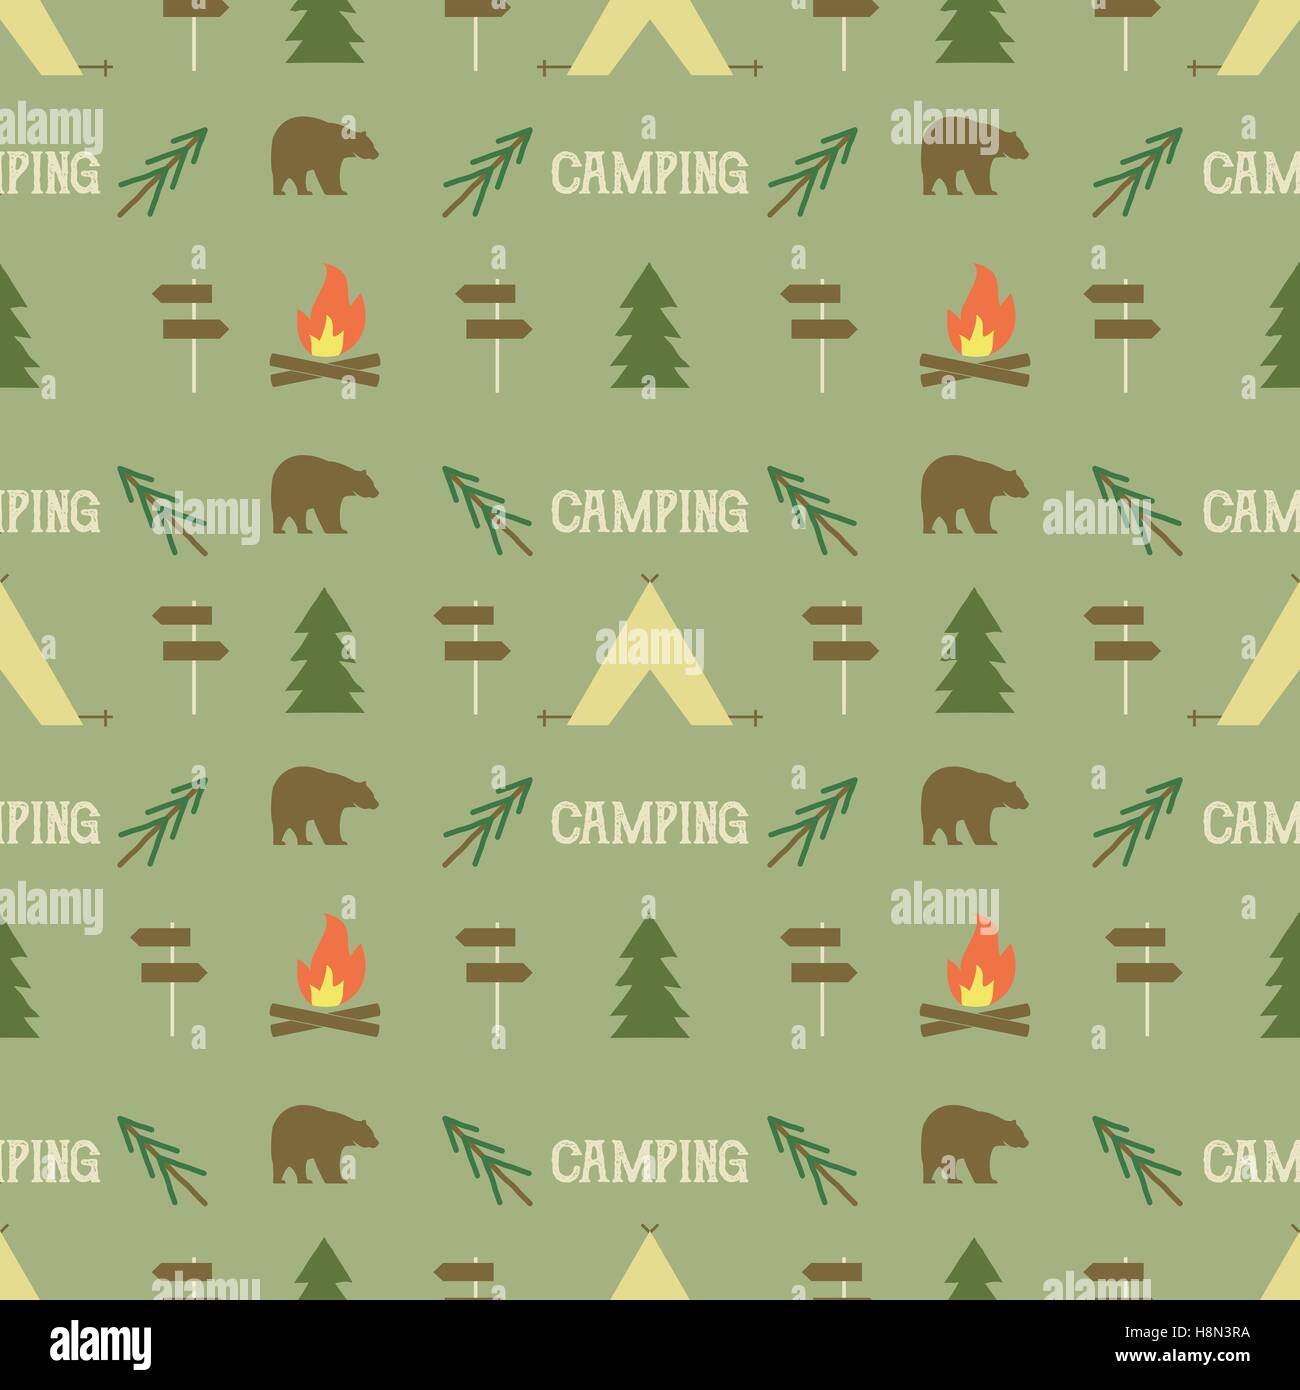 Camping elements pattern. Camping seamless wallpaper design. Equipment for camping background for print. Adventure or camping gear pattern- tent, bear, tree, bonfire. Nature pattern design. Vector. Stock Vector